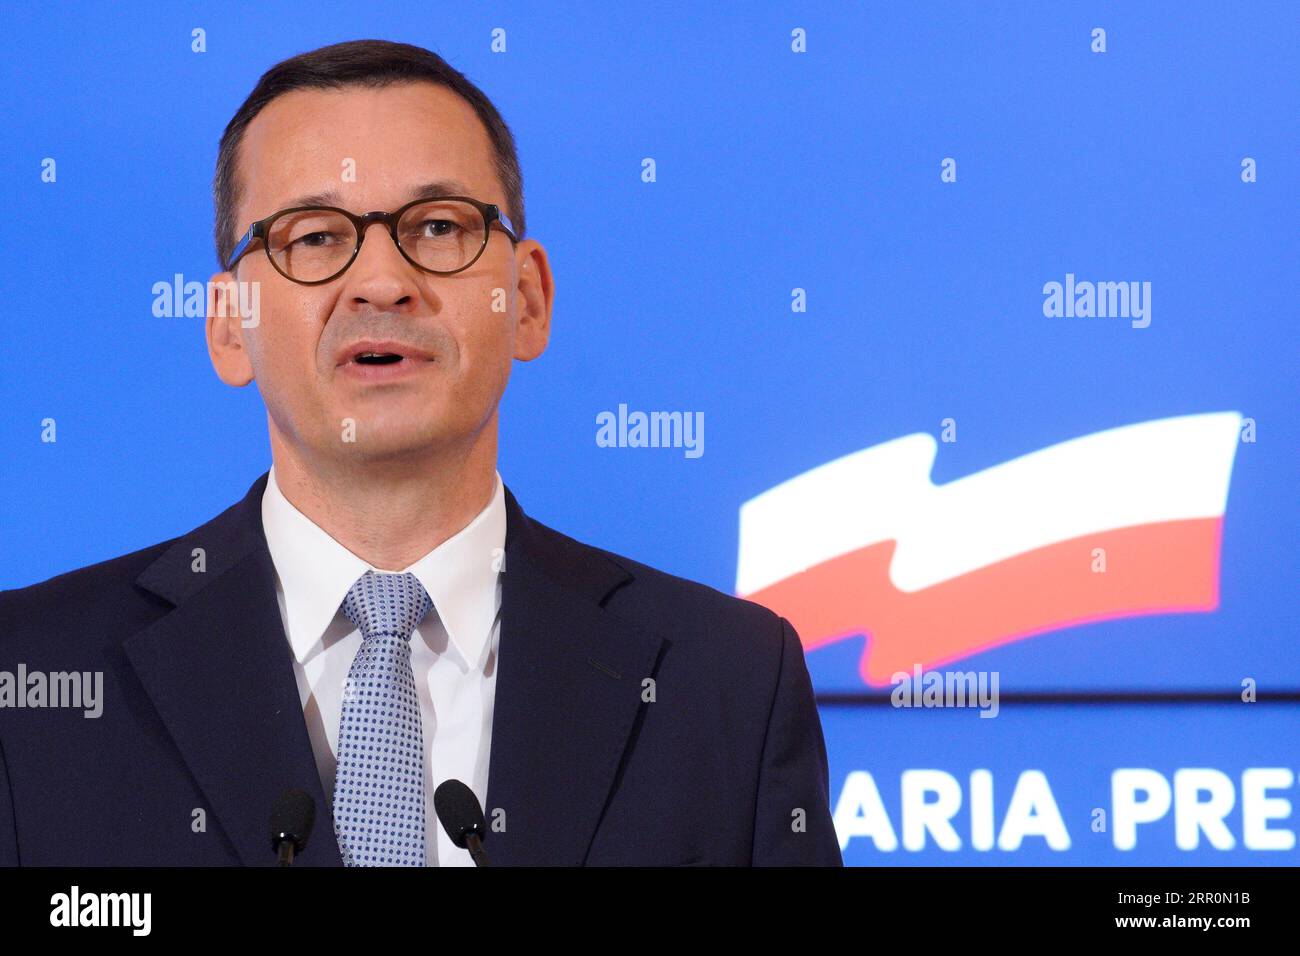 200820 -- WARSAW, Aug. 20, 2020 -- Polish Prime Minister Mateusz Morawiecki speaks during a press conference in Warsaw, Poland, on Aug. 20, 2020. Morawiecki on Thursday announced that Adam Niedzielski would replace Lukasz Szumowski as the new health minister while Zbigniew Rau would replace Jacek Czaputowicz as the new foreign minister, Polish Press Agency reported. Photo by /Xinhua POLAND-WARSAW-PM-PRESS CONFERENCE JaapxArriens PUBLICATIONxNOTxINxCHN Stock Photo